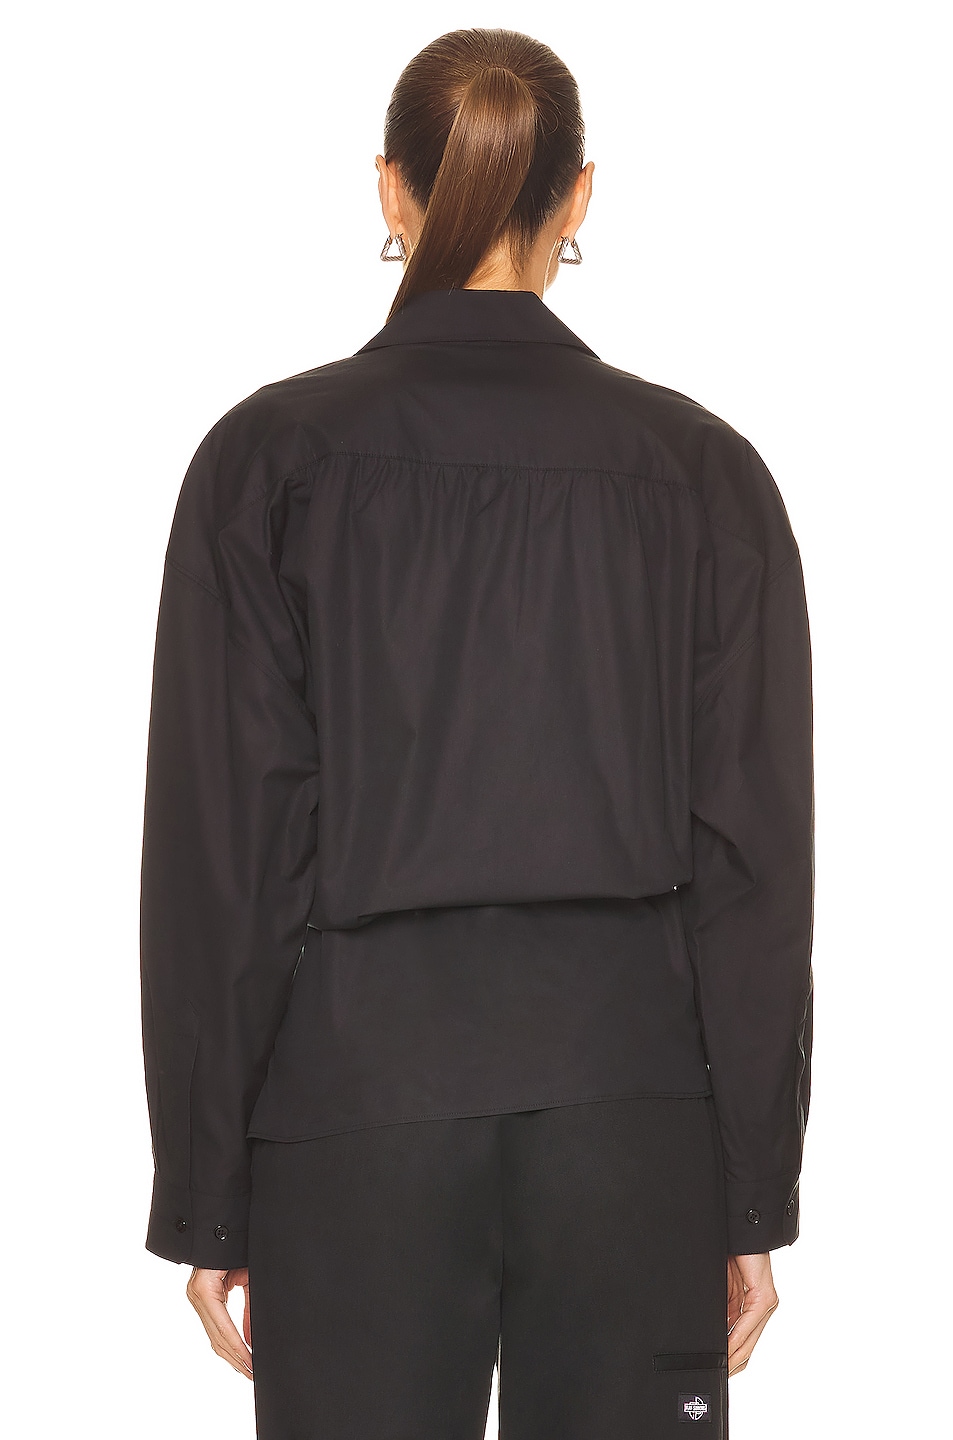 Lemaire Twisted Shirt in Black | FWRD